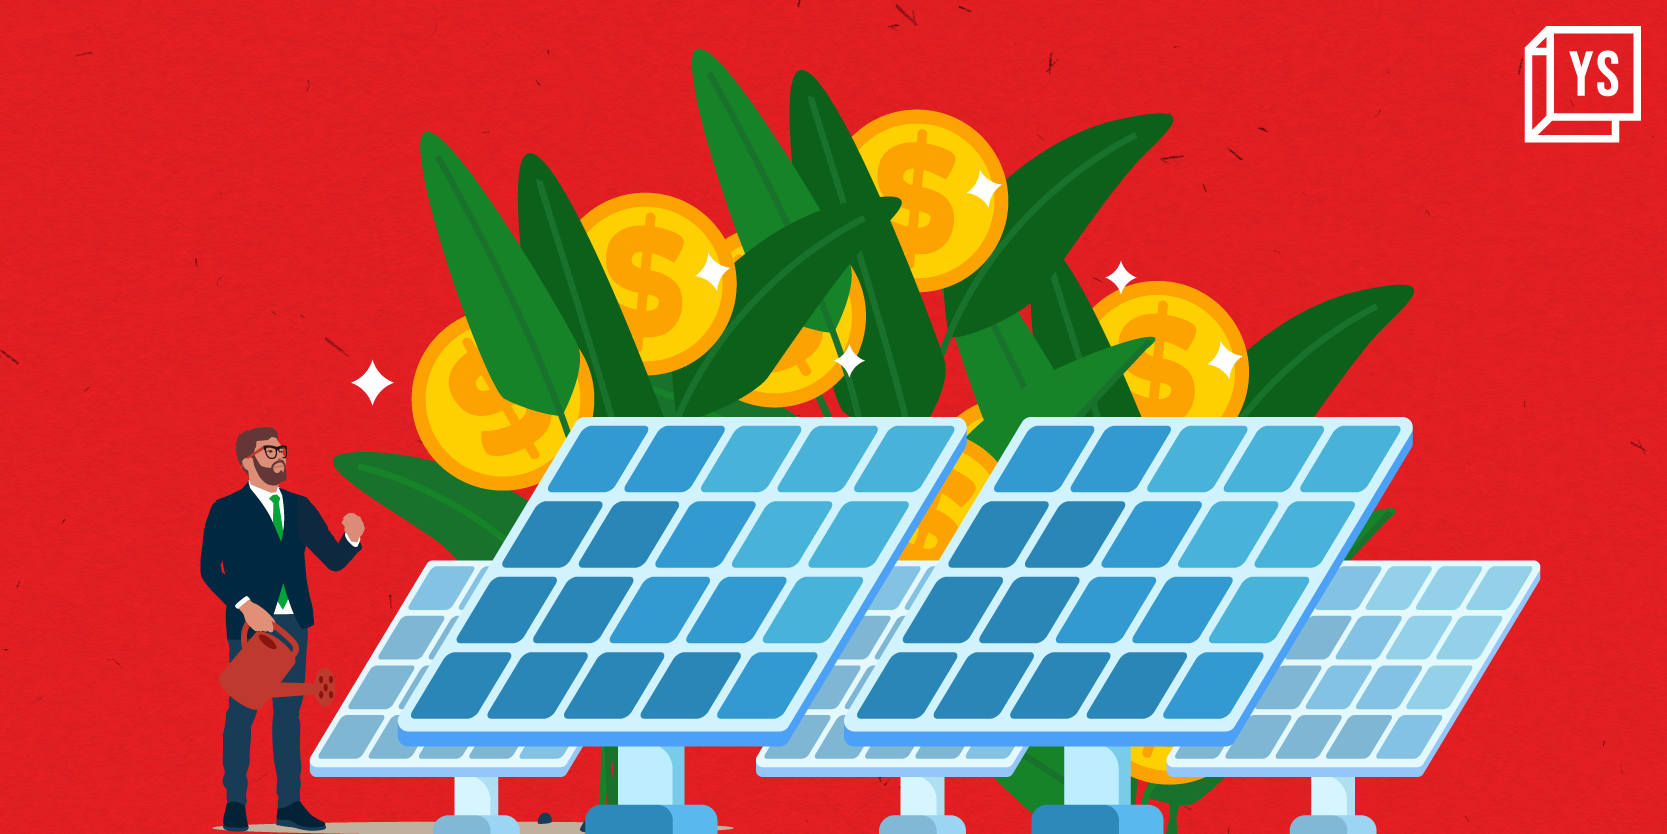 [YS Trend] Hot off the oven: New-age platforms entice retail investors with solar biscuits